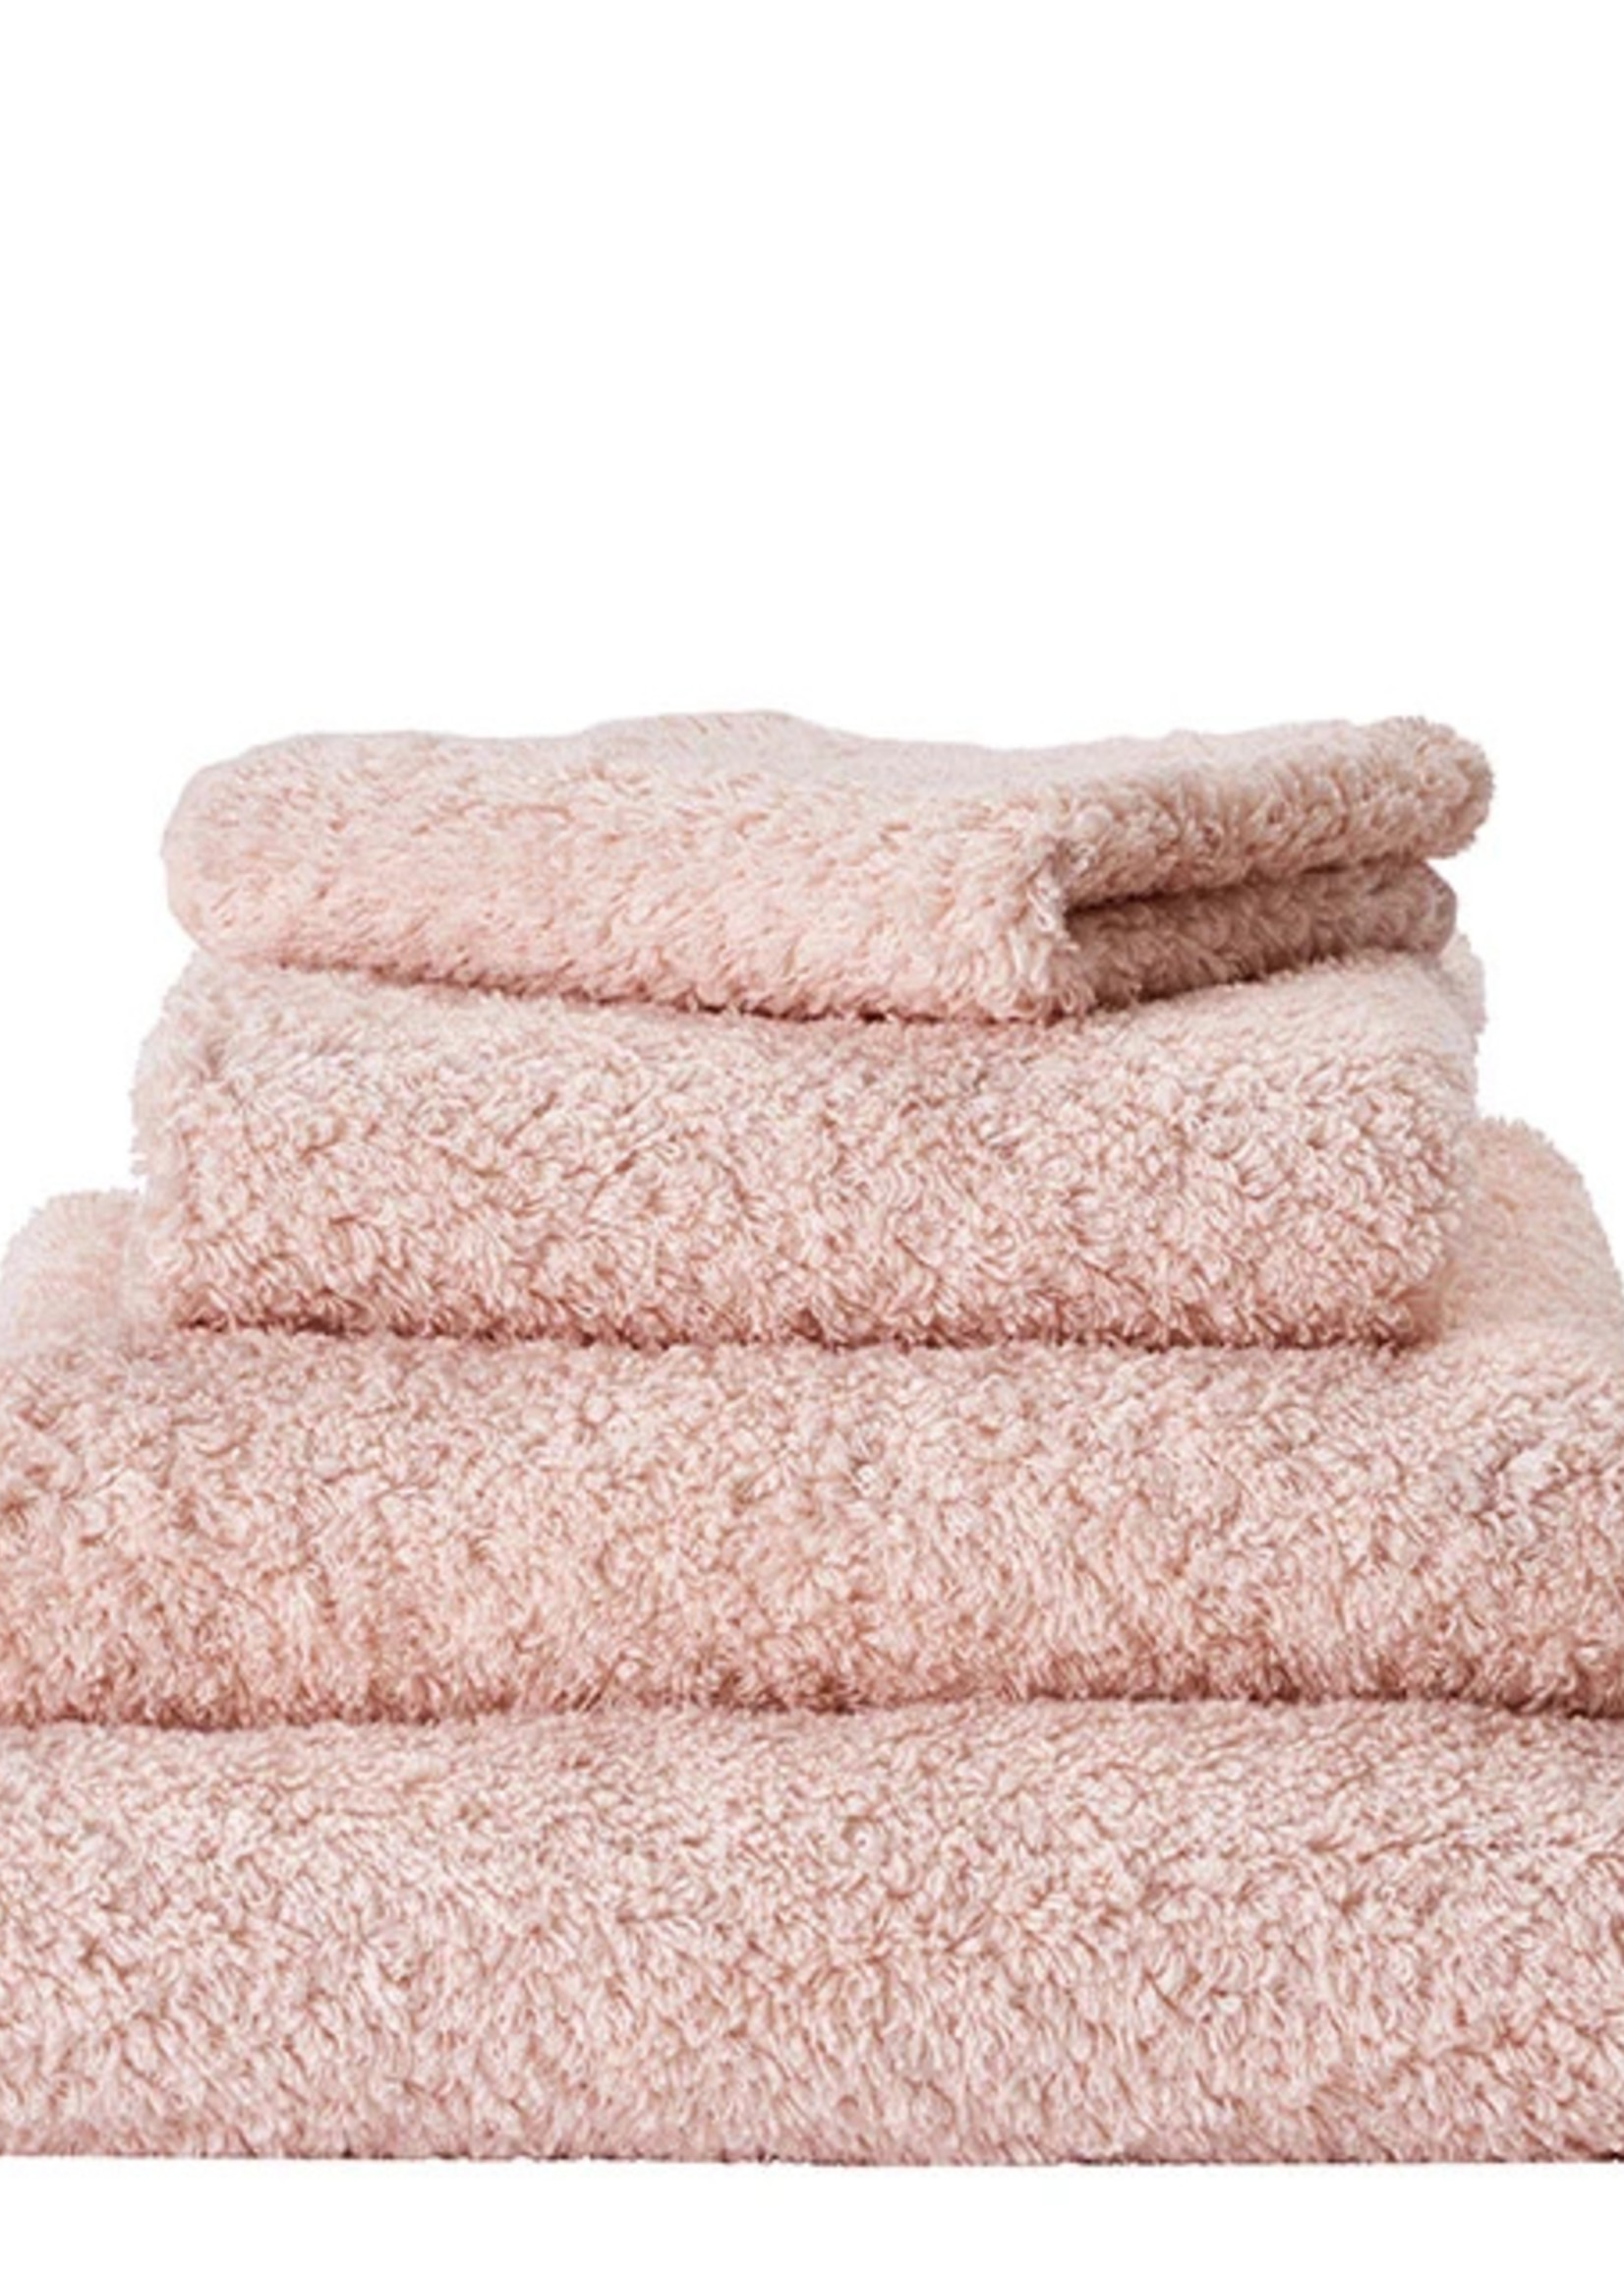 Abyss & Habidecor Super Pile Nude Towels